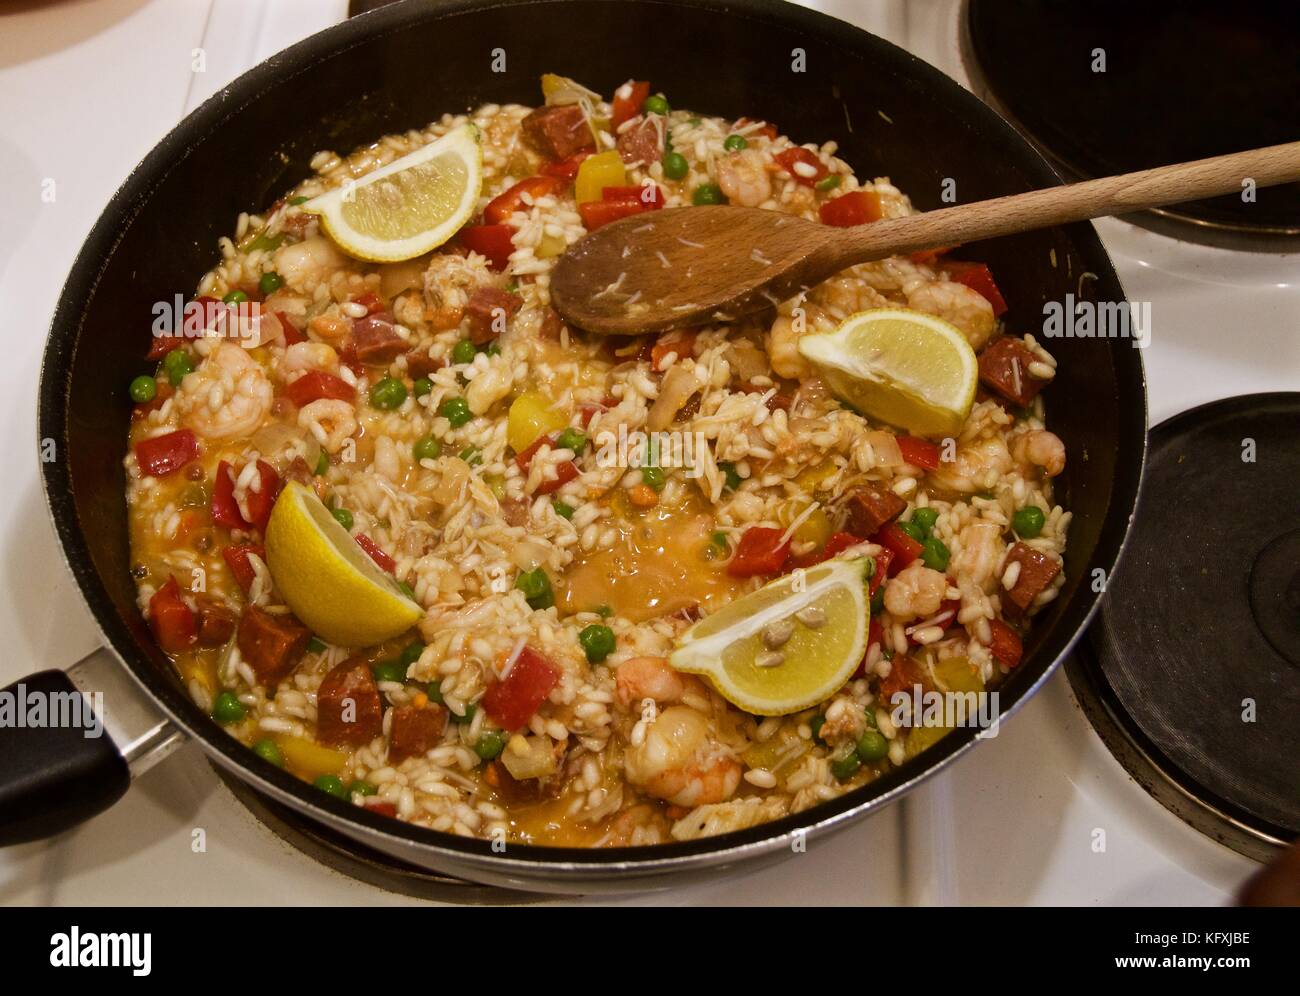 Cooking a seafood paella on the hob in a teflon coated wok with wooden  spoon Stock Photo - Alamy